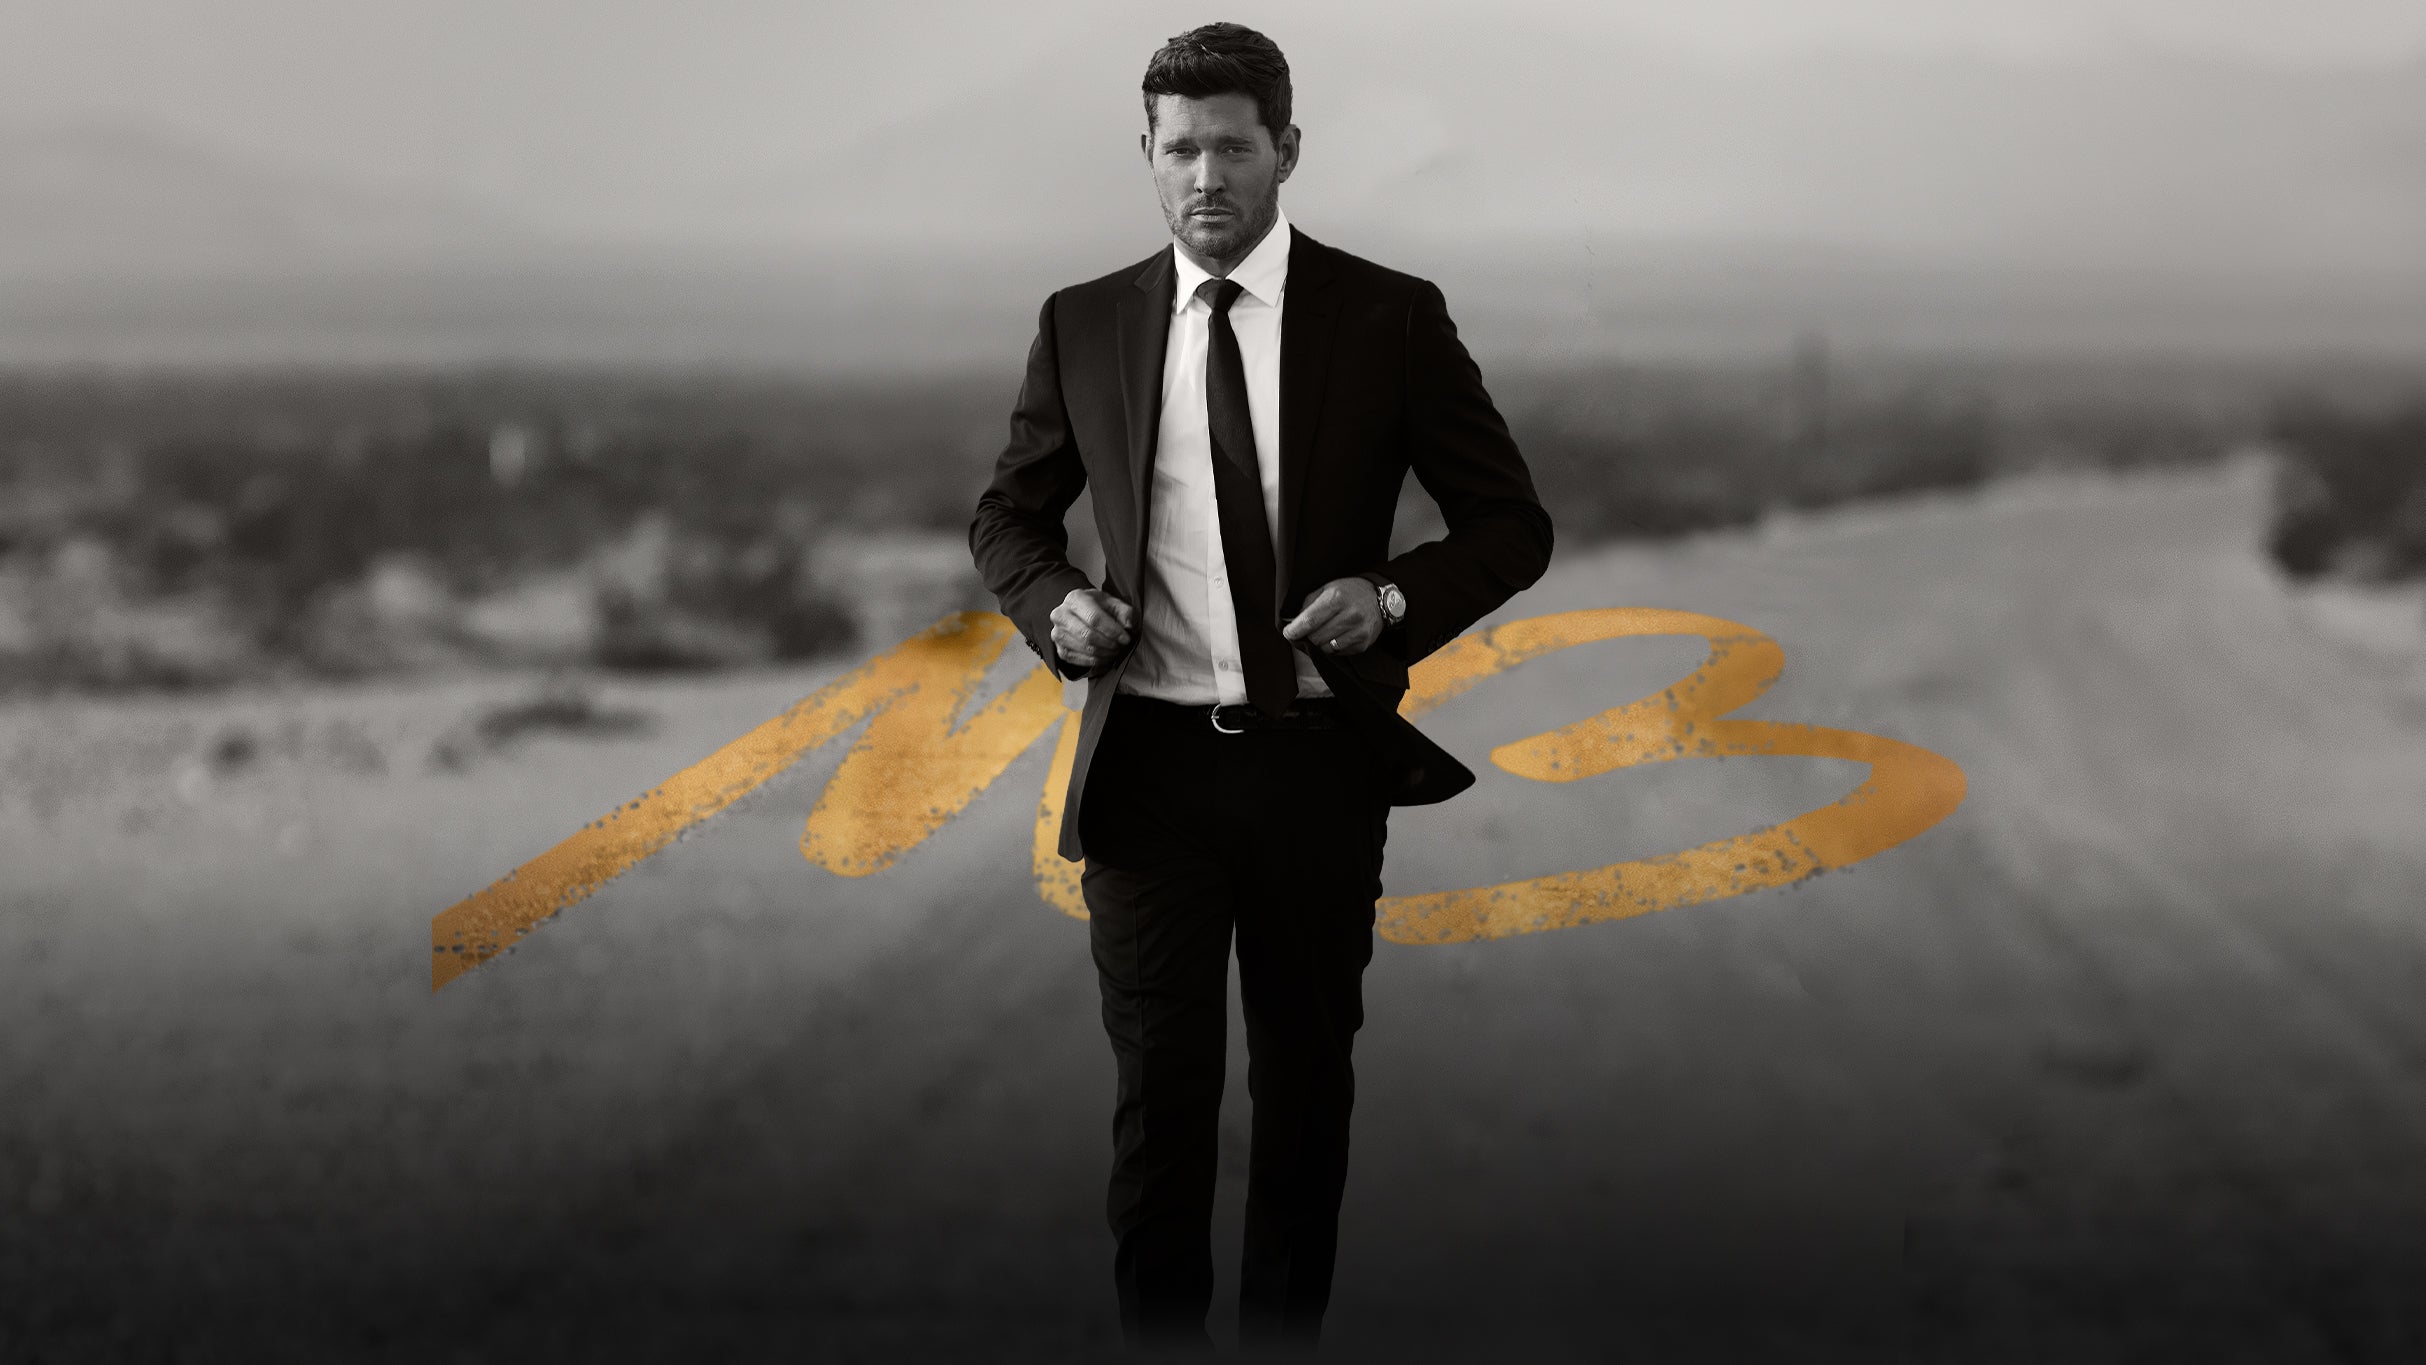 An Evening with Michael Bublé in Pittsburgh event information